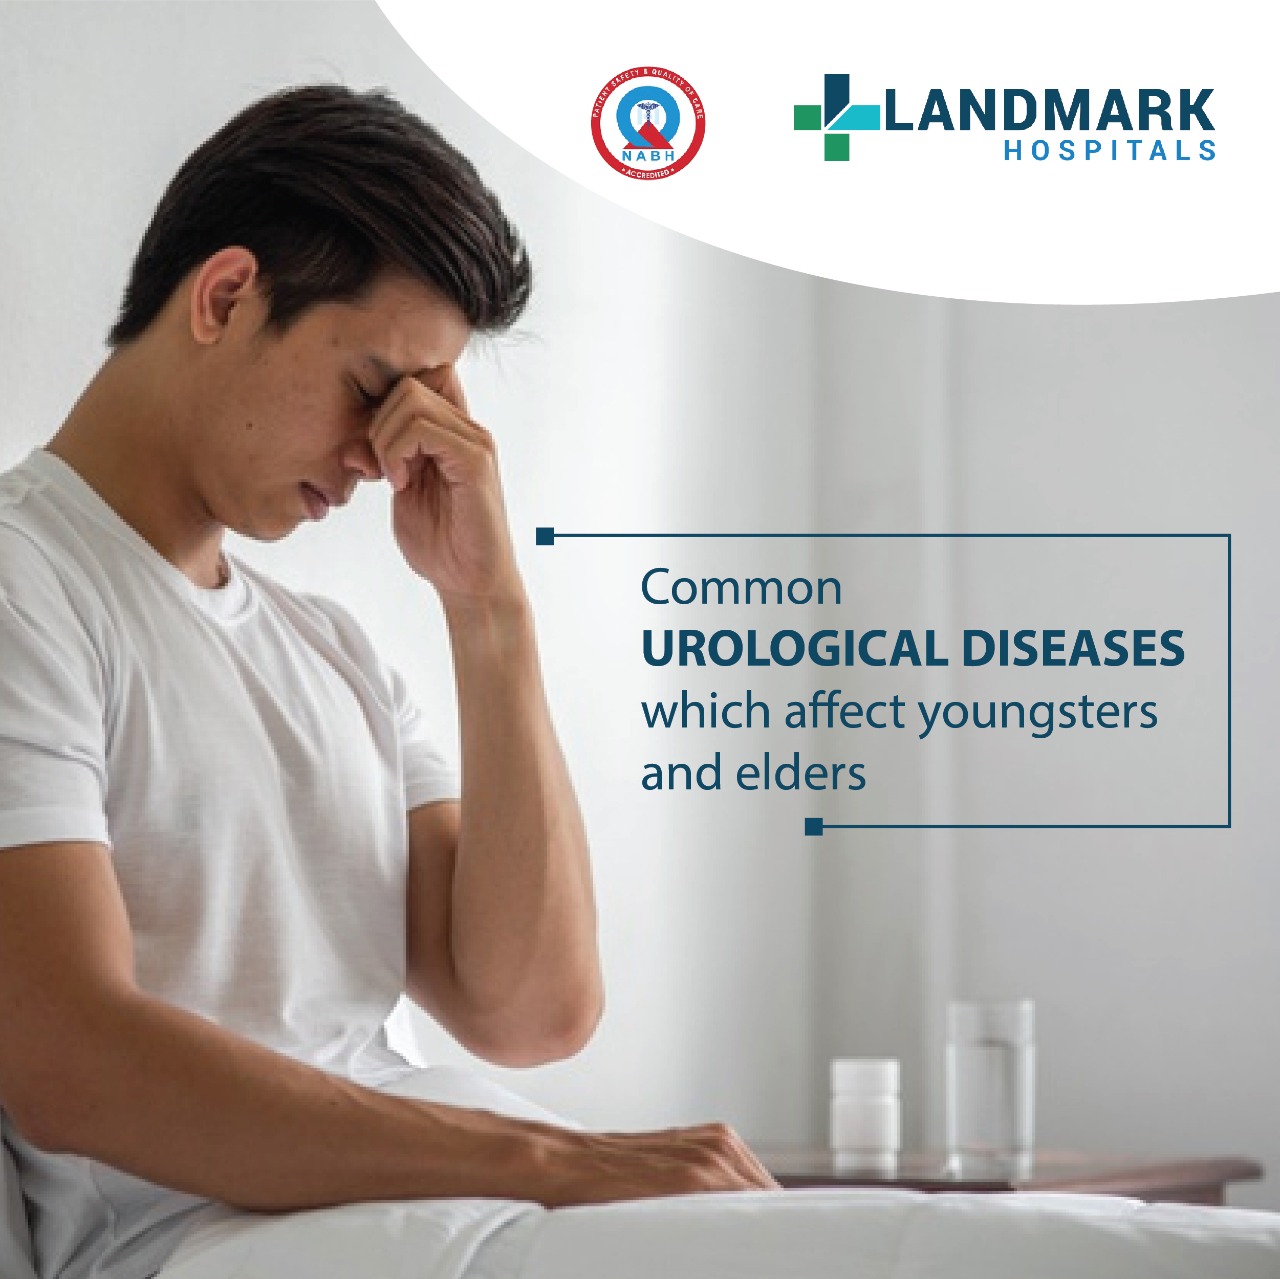 Common urological diseases which affect youngsters and elders.